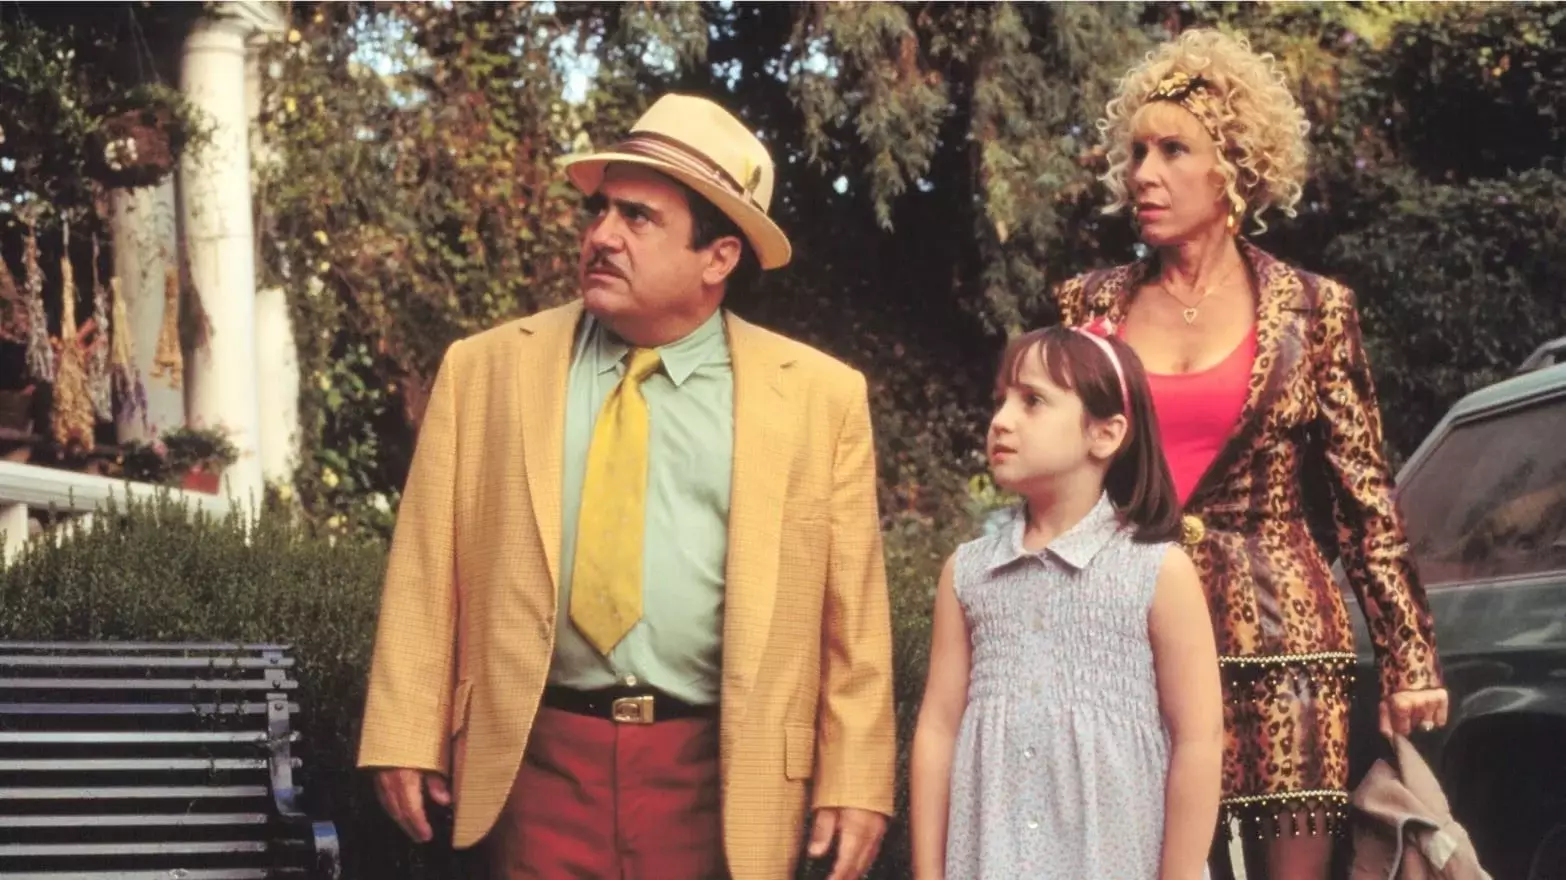 Danny Devito's 1996 movie version put an American spin on the British children's story (